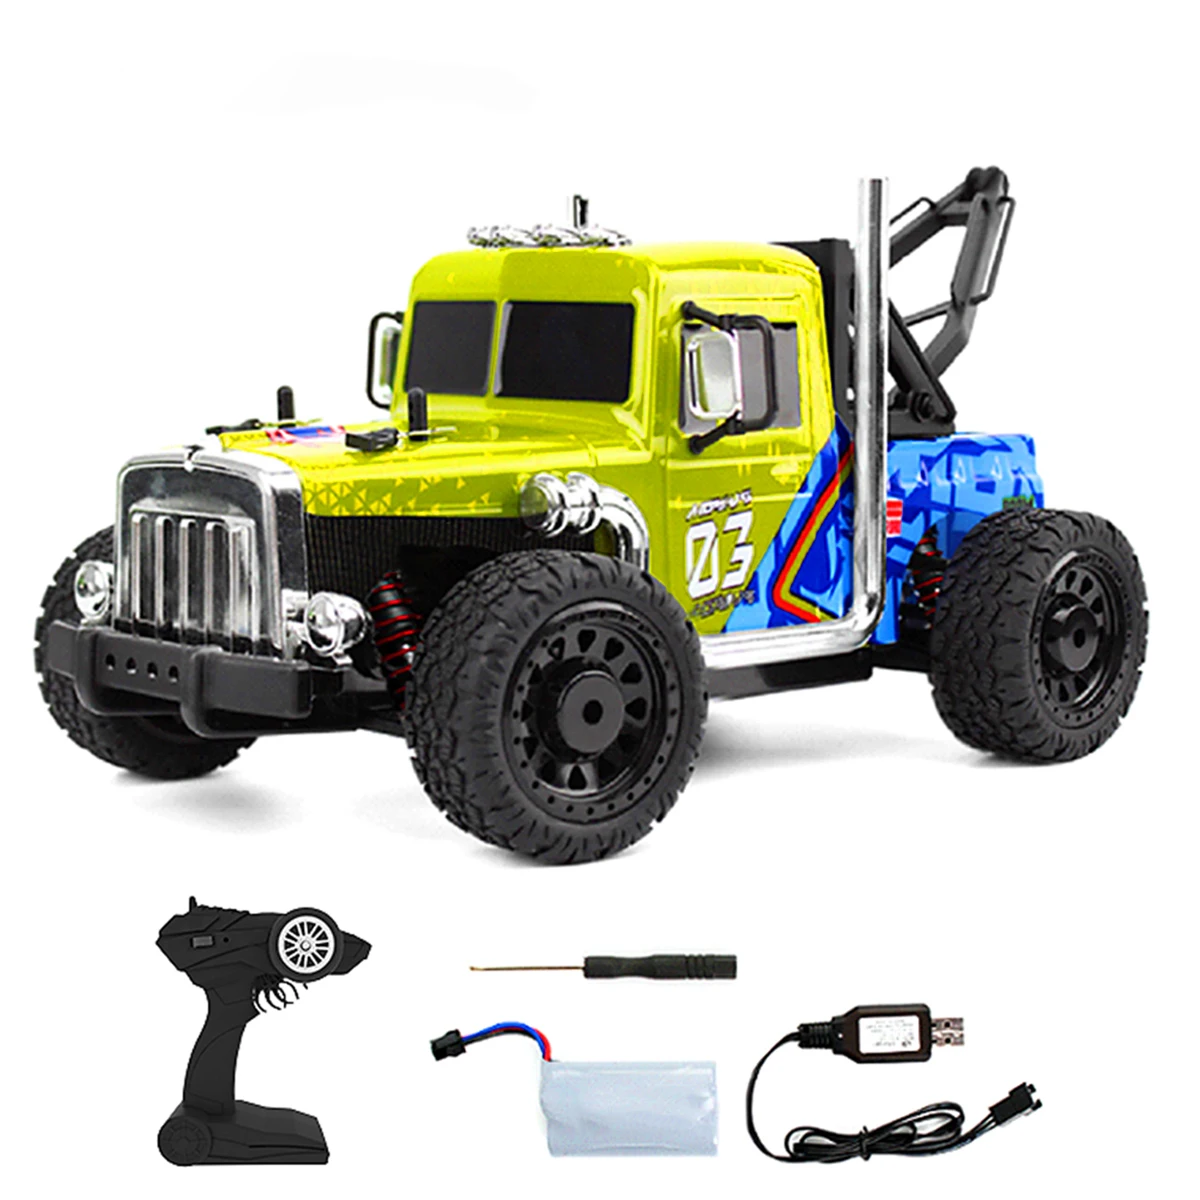 RC Car Toy 2.4Ghz 4WD Ratio Remote Control Car High Speed Racing Off-Road RC Drift Car Trucks Kids Model Toys Christmas Gift enlarge